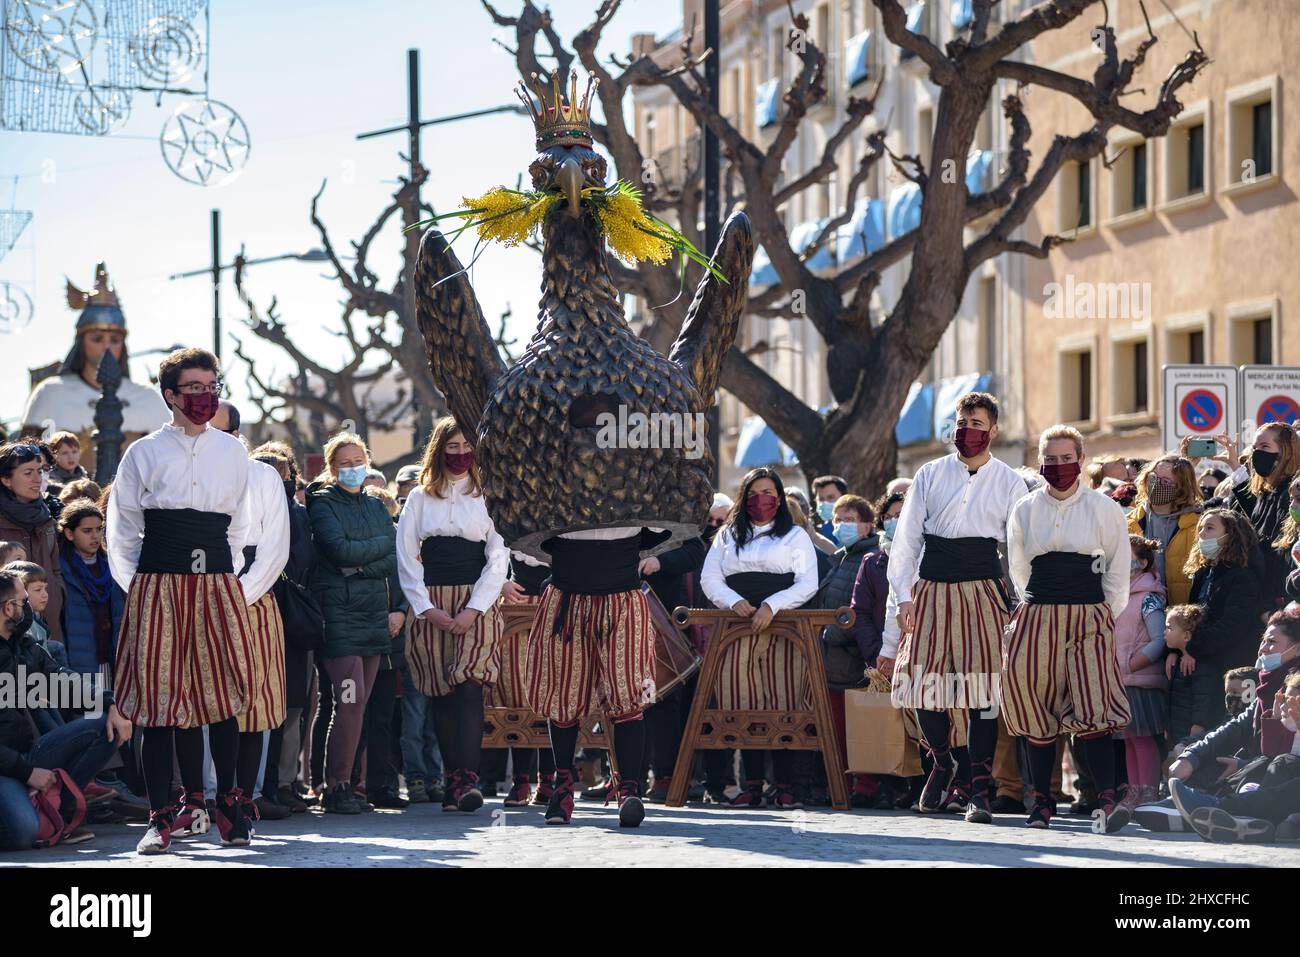 Dance of the Eagle of Barcelona at the 2022 Valls Decennial Festival, in honor of the Virgin of the Candlemas in Valls (Tarragona, Catalonia, Spain) Stock Photo